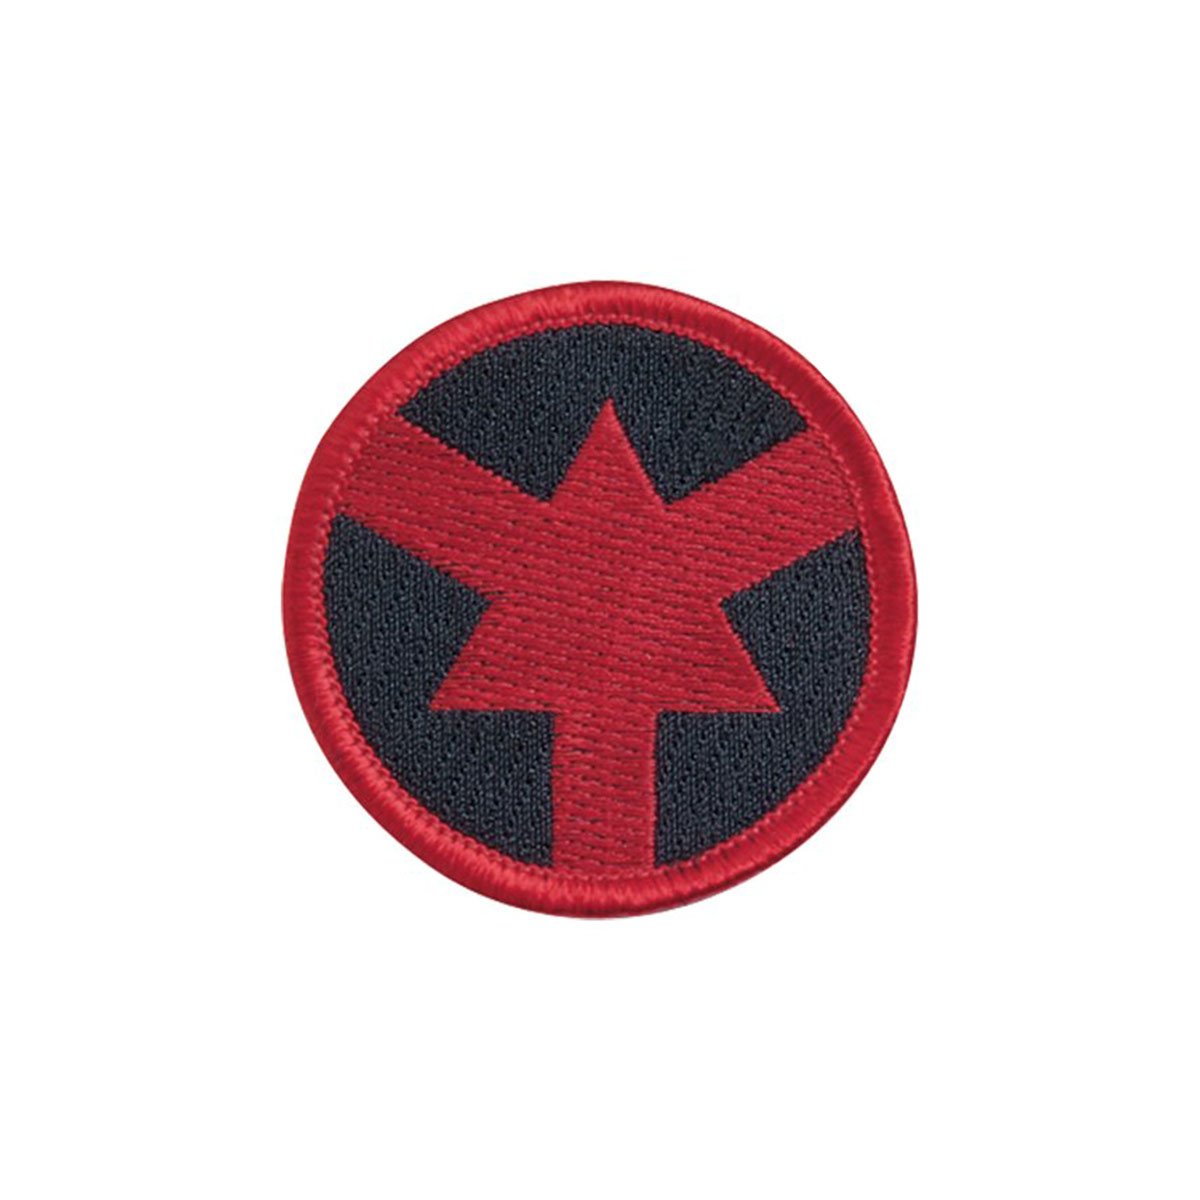 Red Arrow "Certified Officer"